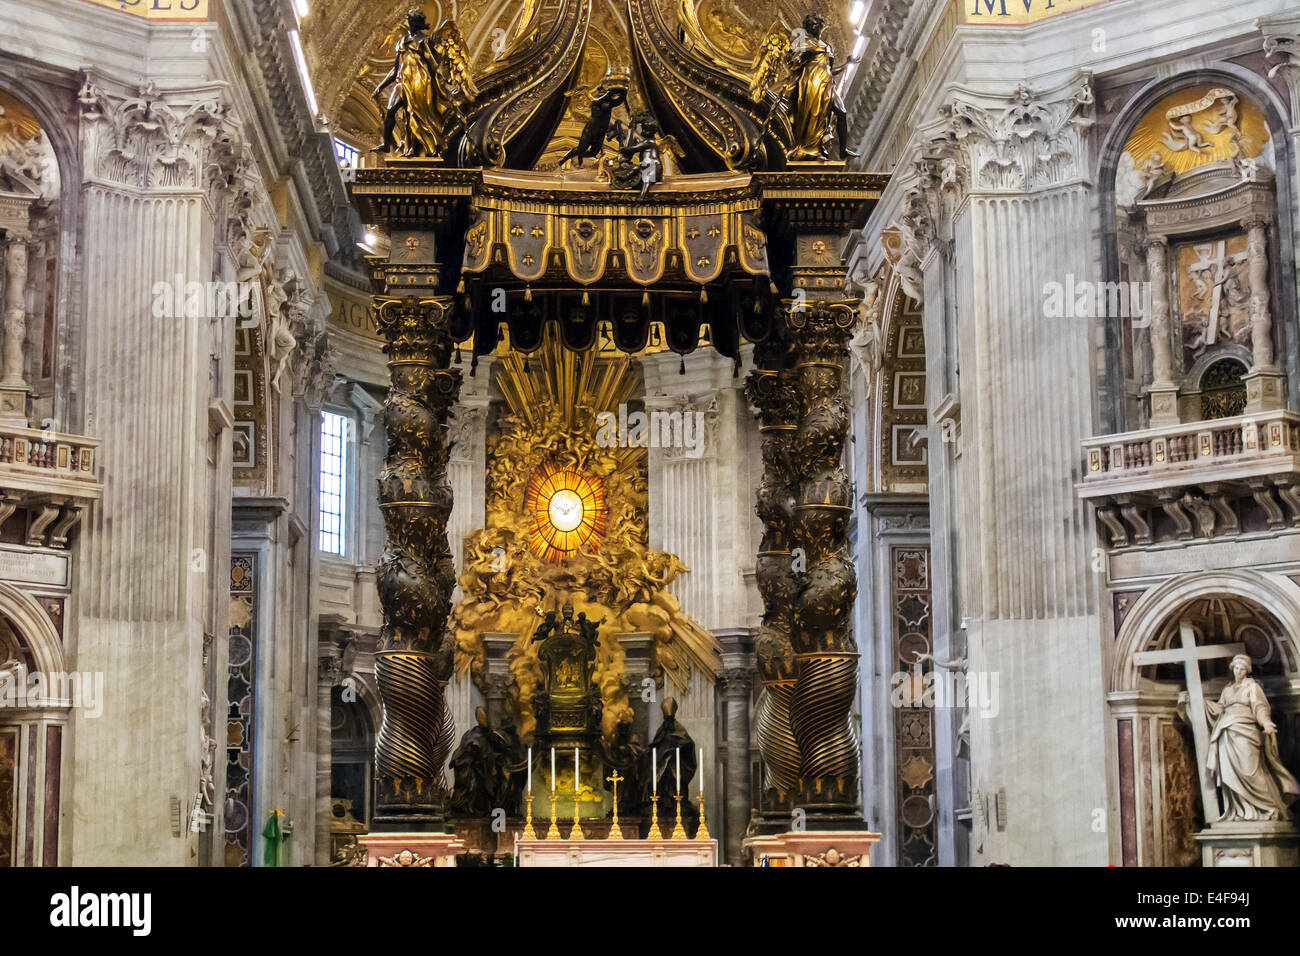 The baldachin above the Papal altar in St Peter's Basilica in the ...